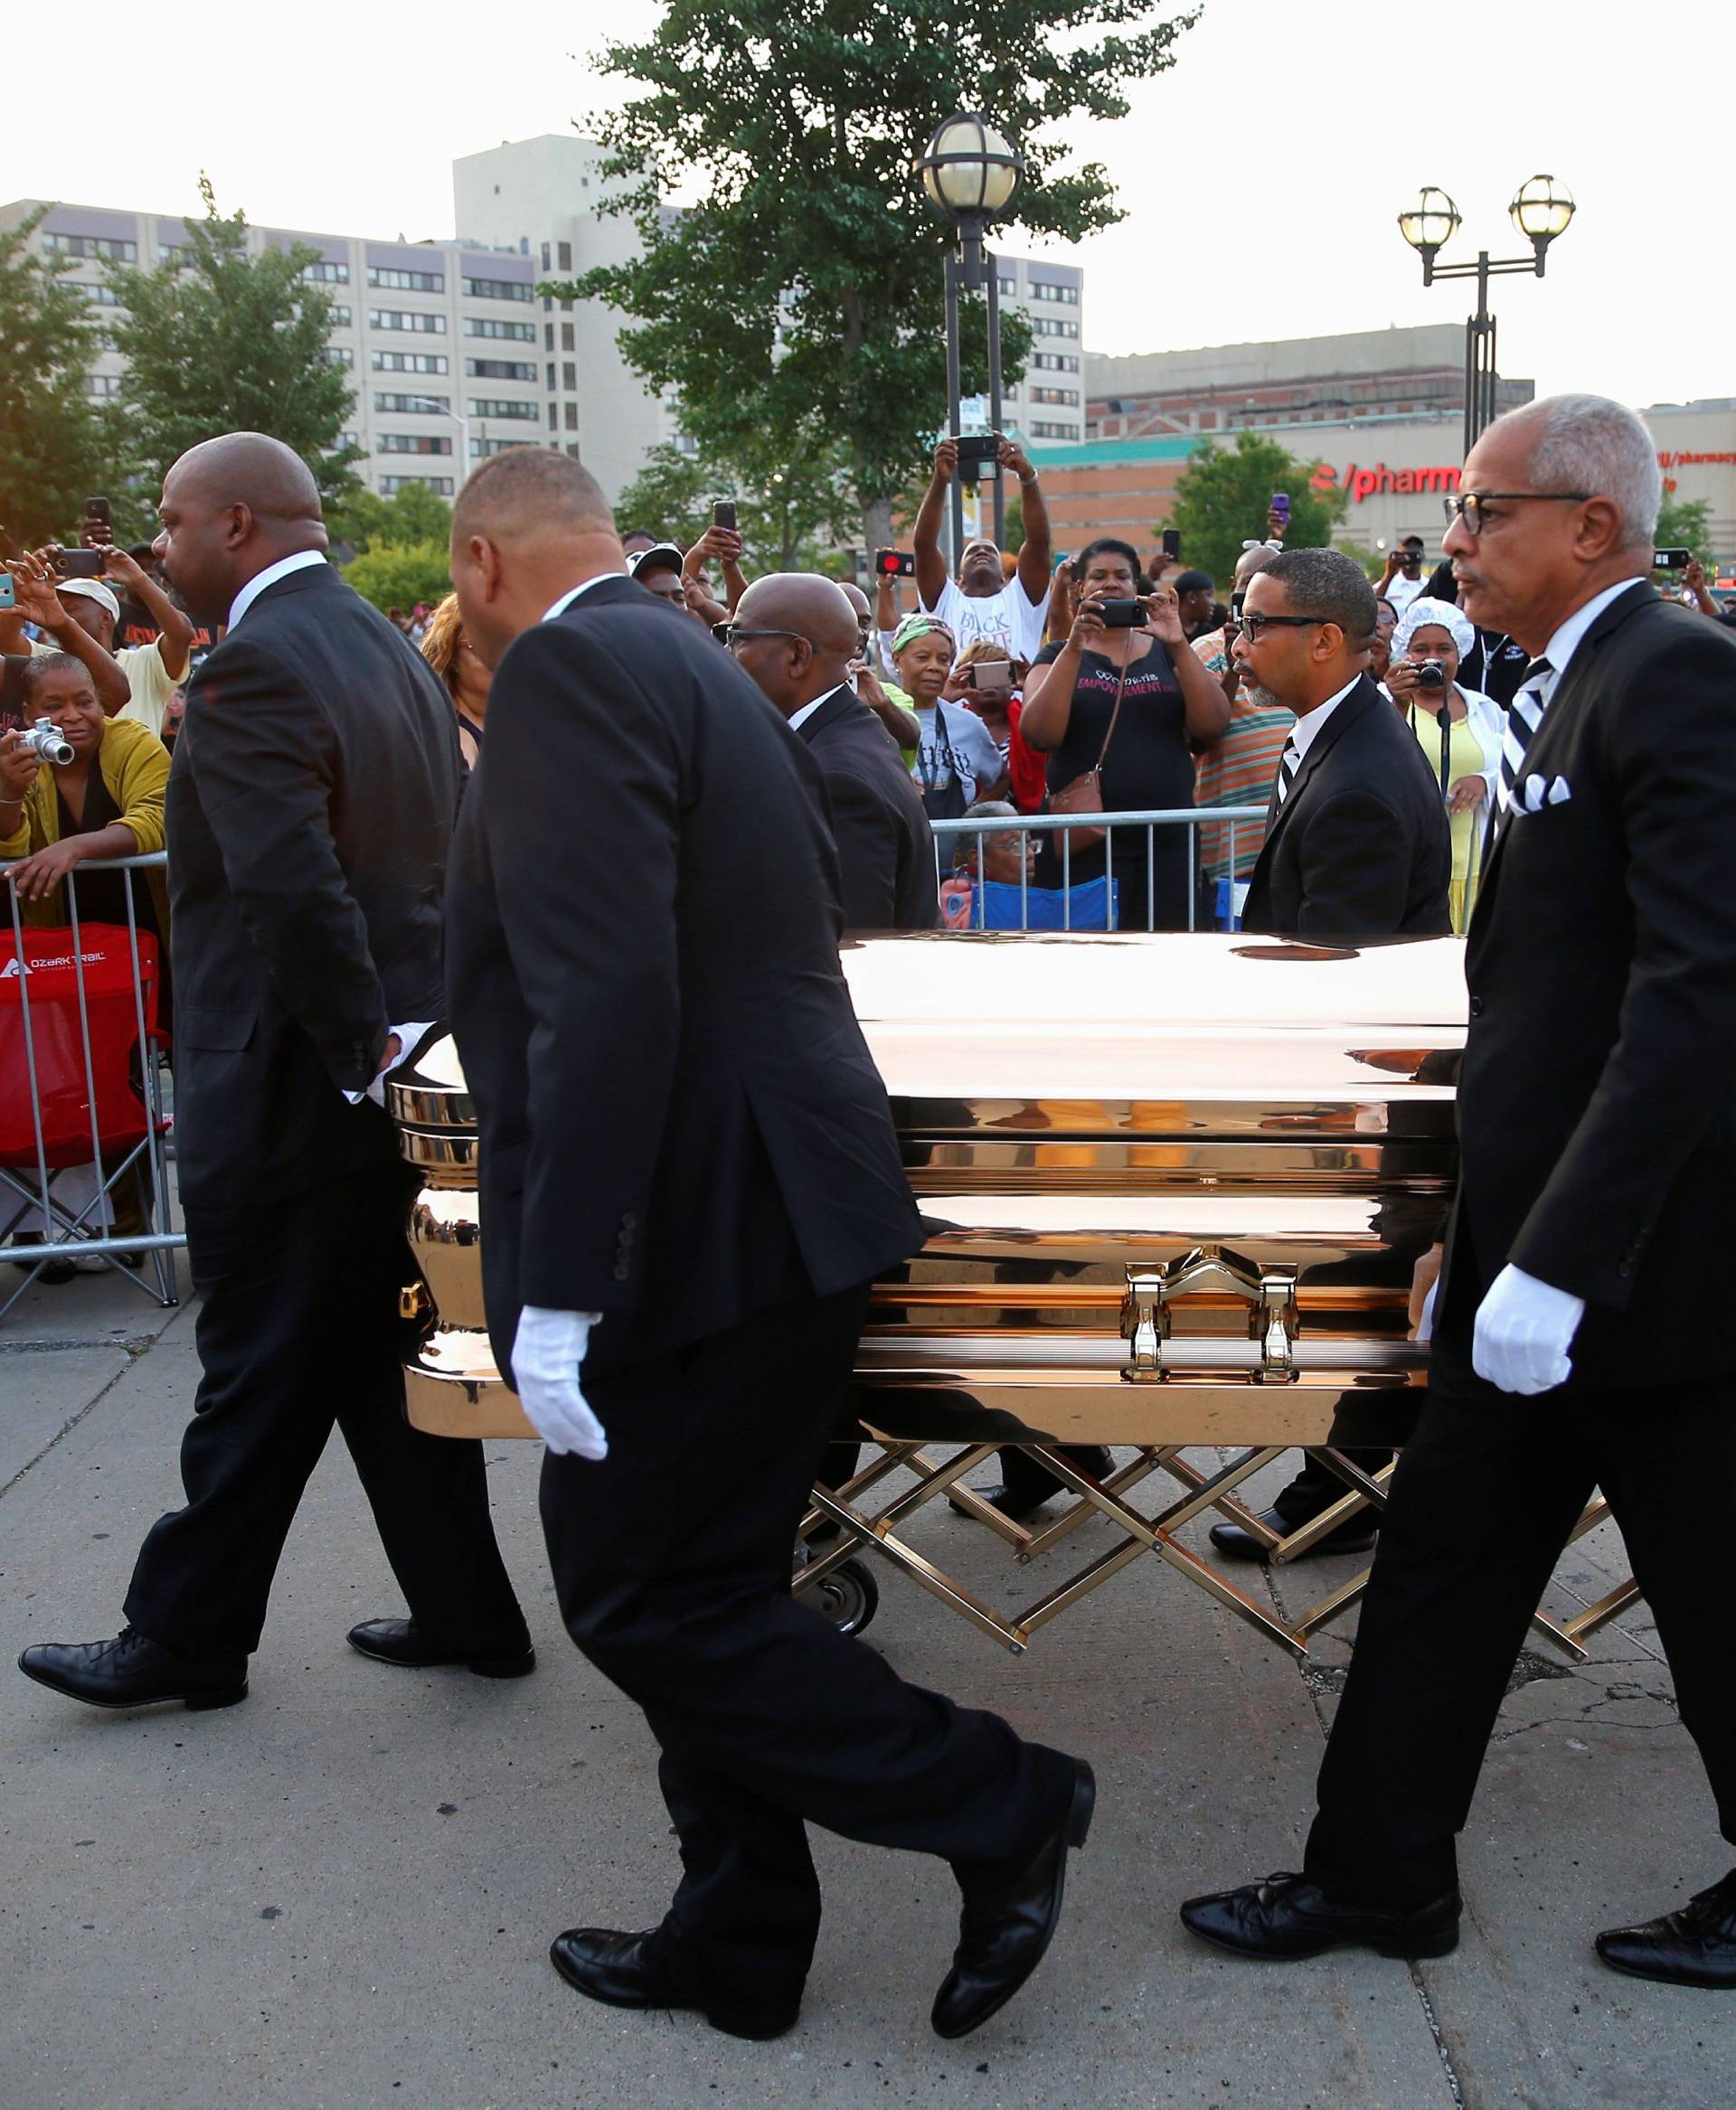 The casket carrying the late singer Aretha Franklin arrives at the Charles H. Wright Museum of African-American History where she will lie in state for two days of public viewing, in Detroit